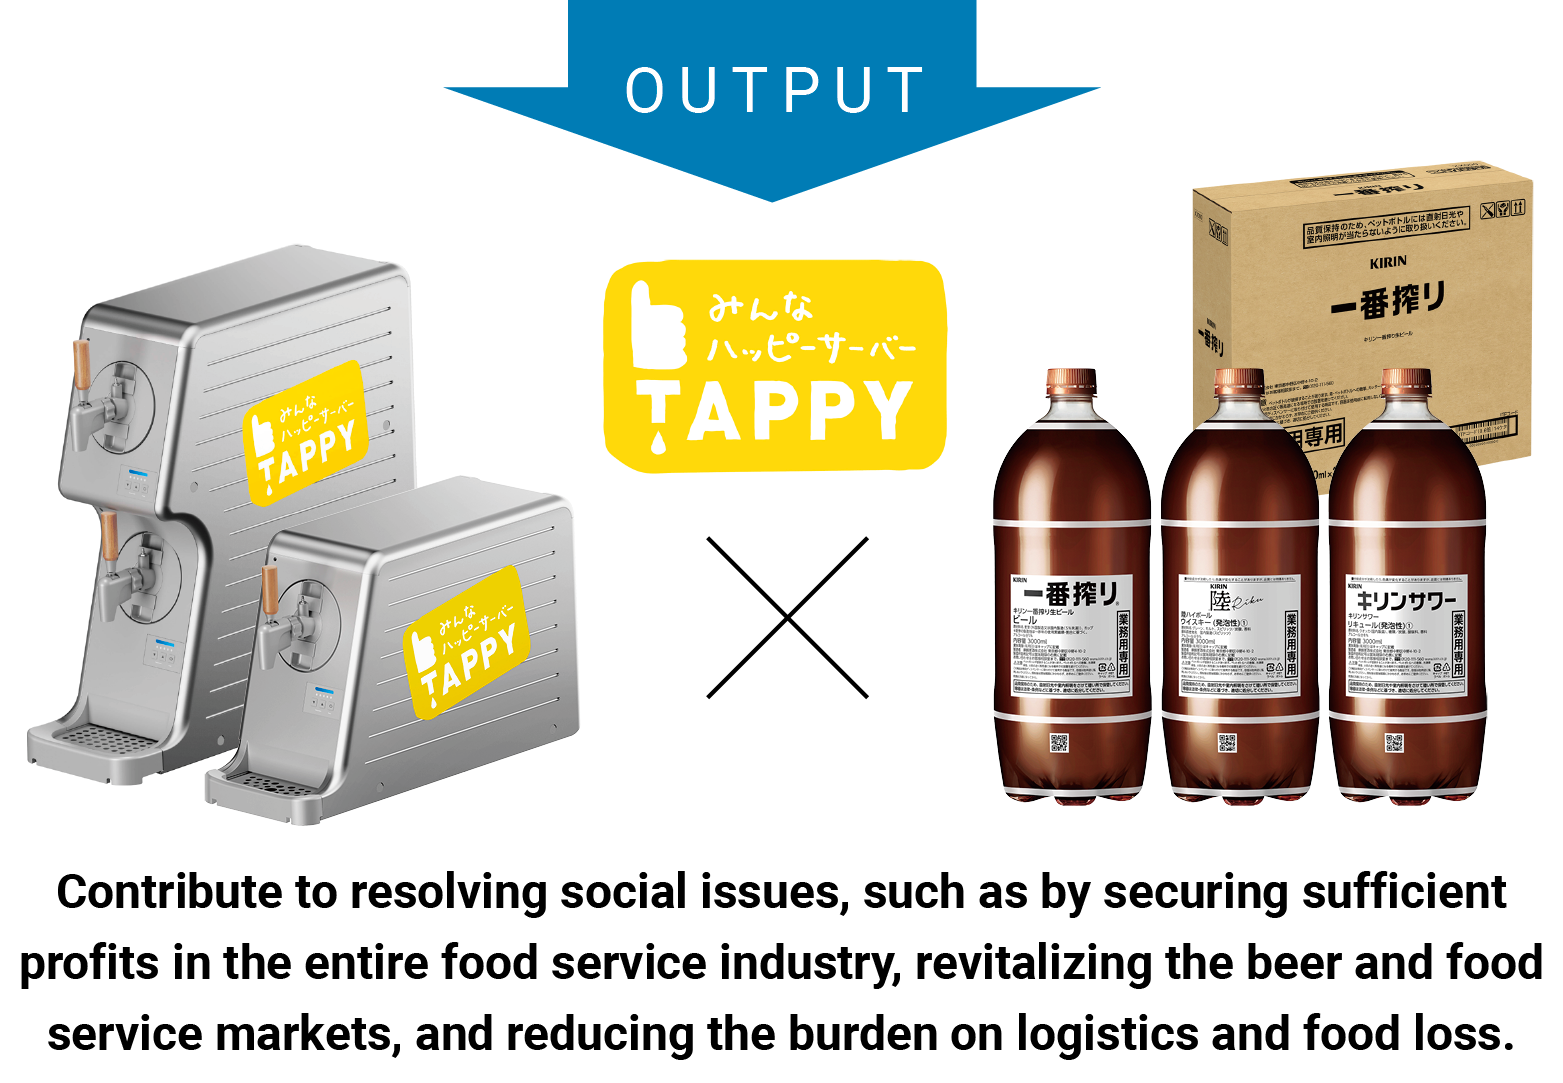 TAPPY. Contribute to resolving social issues, such as by securing sufficient profits in the entire food service industry, revitalizing the beer and food service markets, and reducing the burden on logistics and food loss.